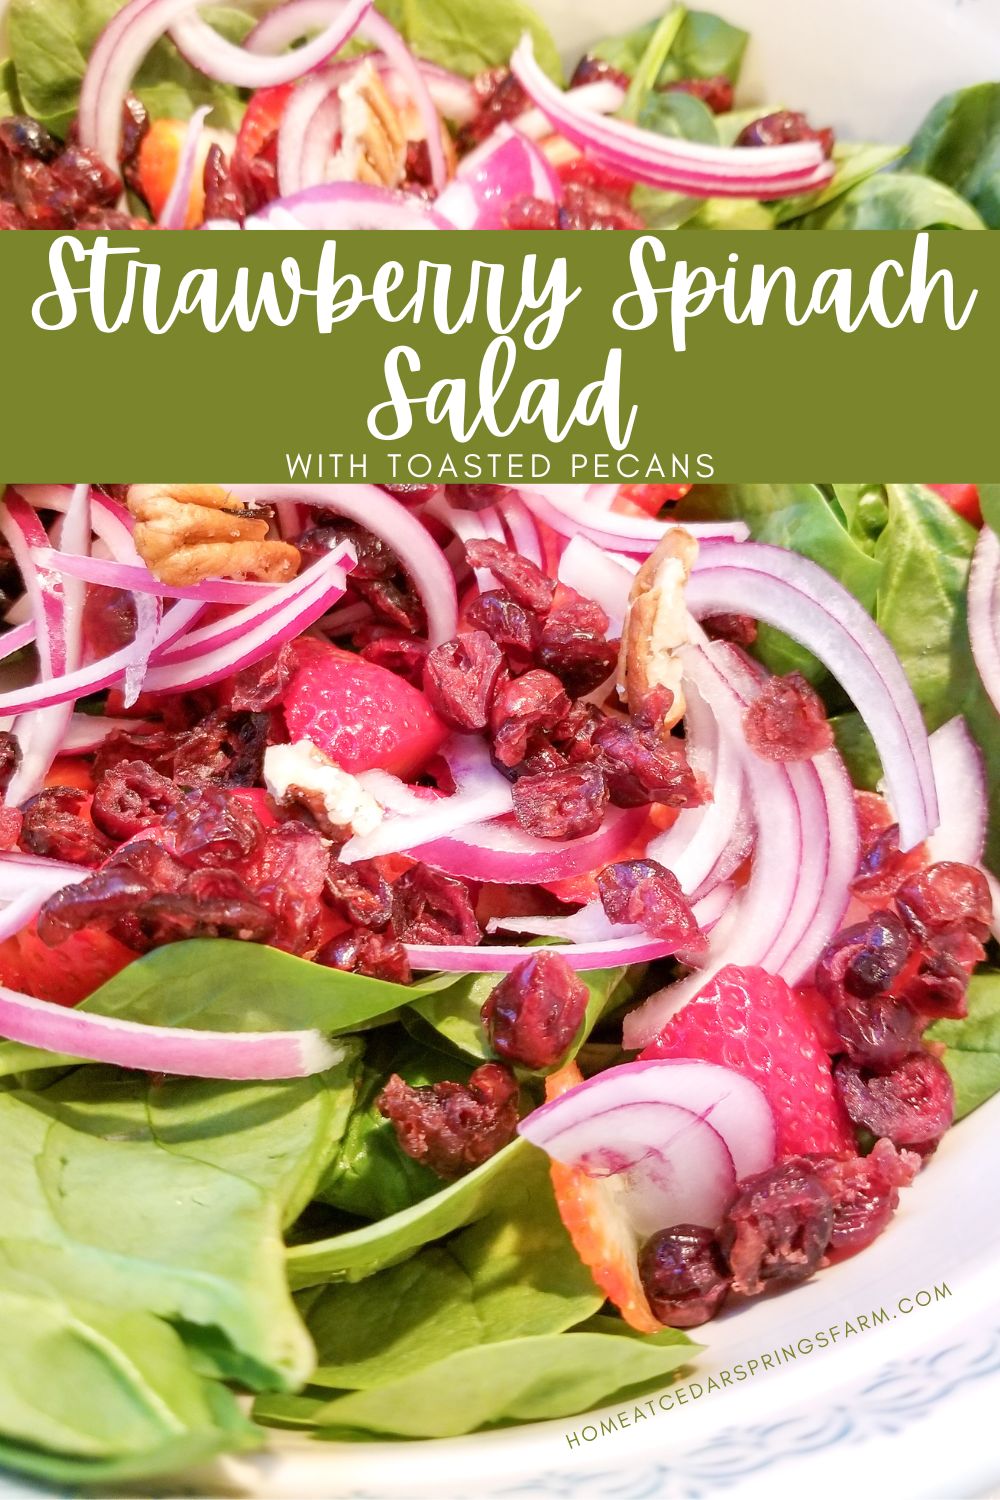 Picture of Strawberry Spinach Salad with text overlay